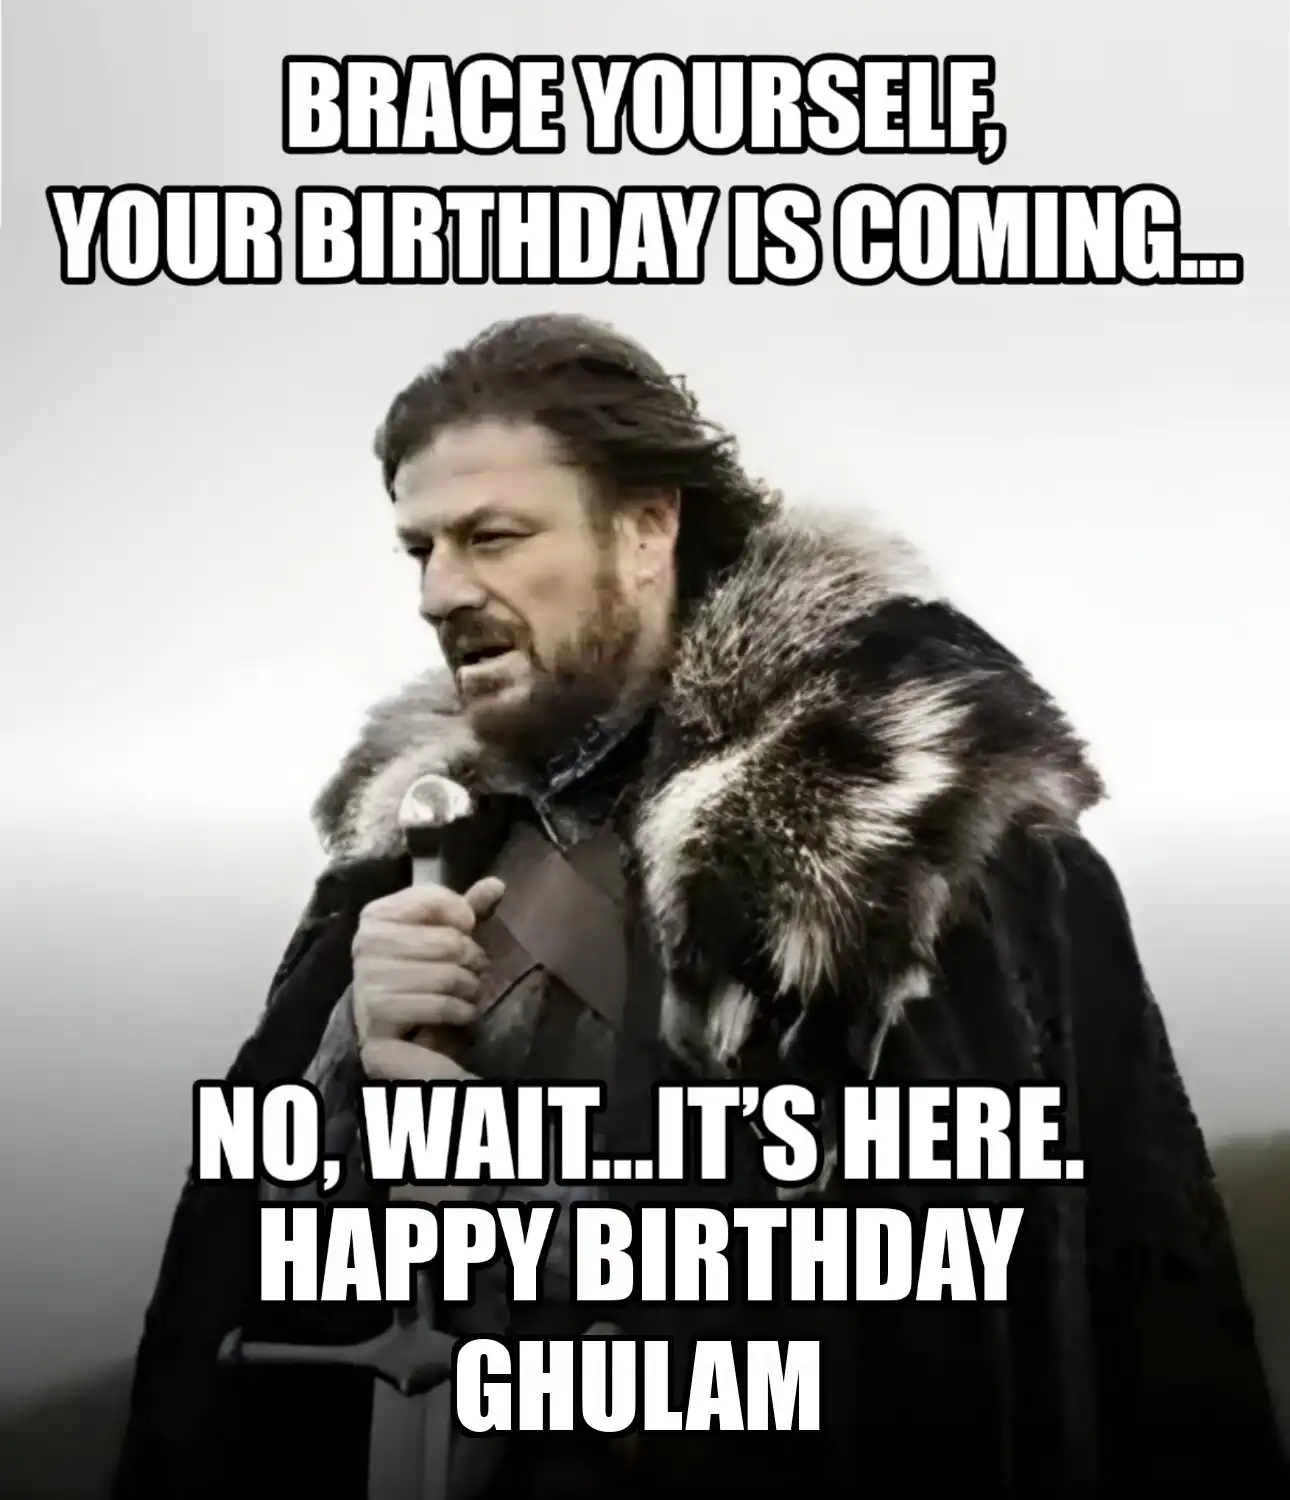 Happy Birthday Ghulam Brace Yourself Your Birthday Is Coming Meme